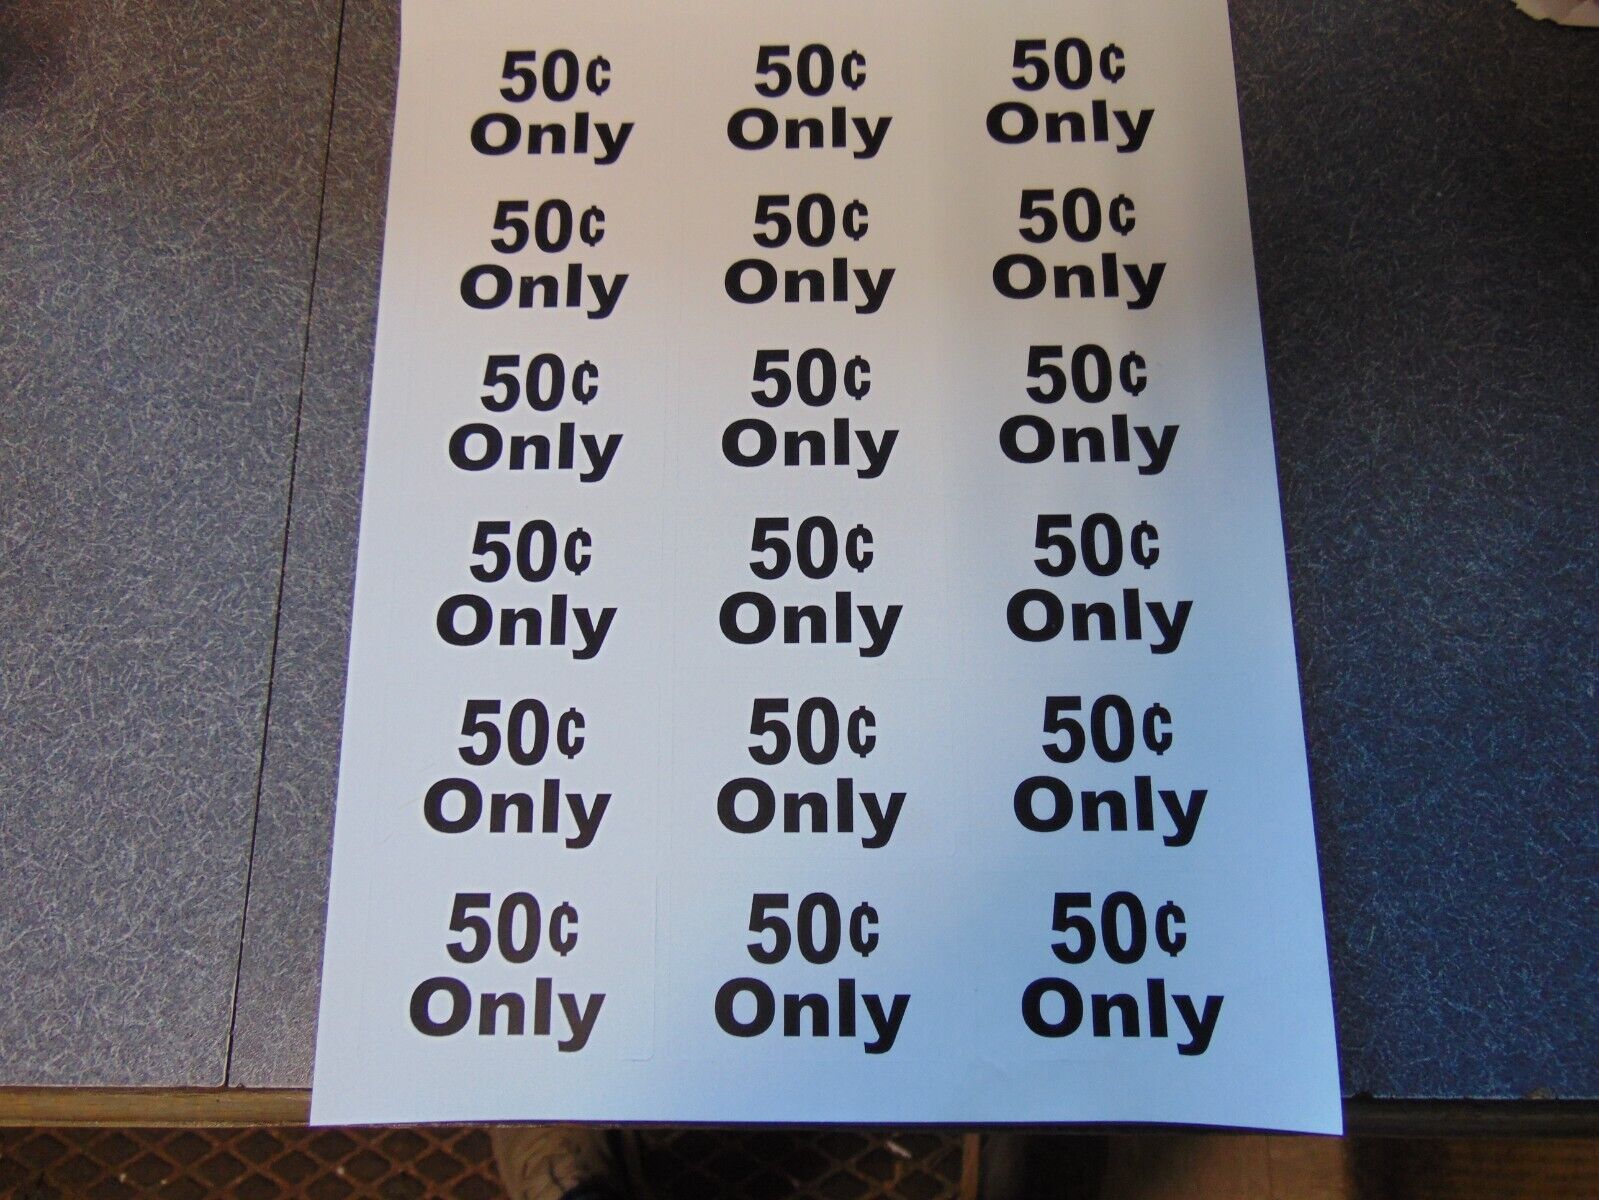  18 New 50 Cent Decal Stickers. Arcade Game, Skee Ball, Gambling, Vending, Etc.